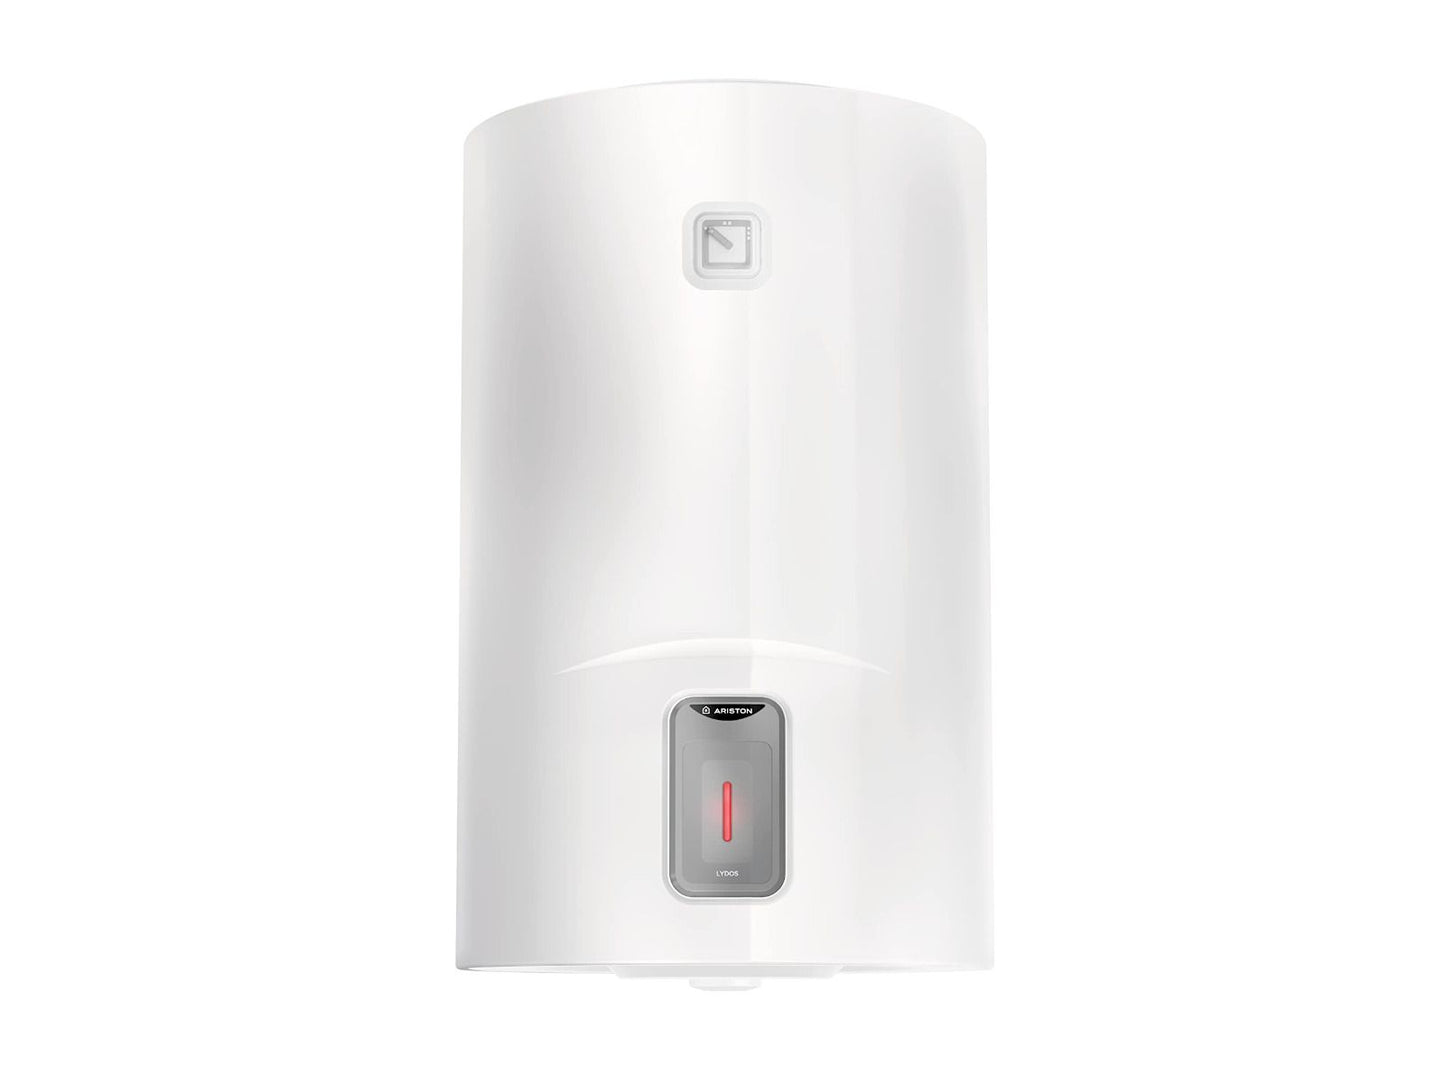 Ariston Water Heater 80- Vertical Made In Italy 7 Year Warranty